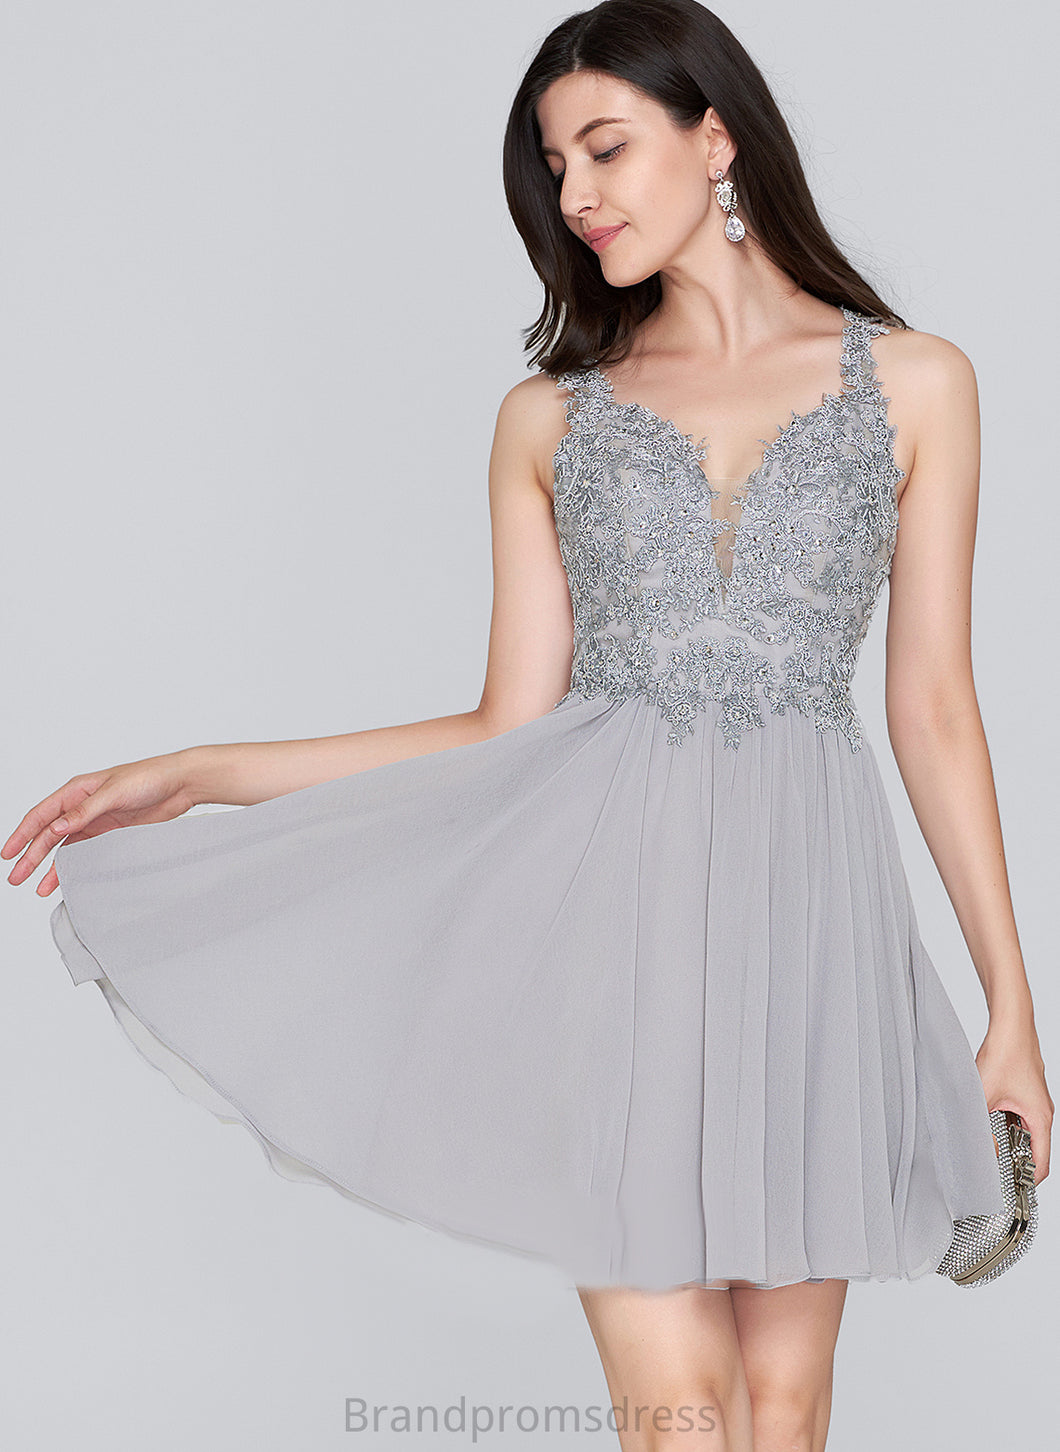 A-Line Dress Lace Sequins Homecoming Chiffon Brynlee Beading Sweetheart Short/Mini Homecoming Dresses With